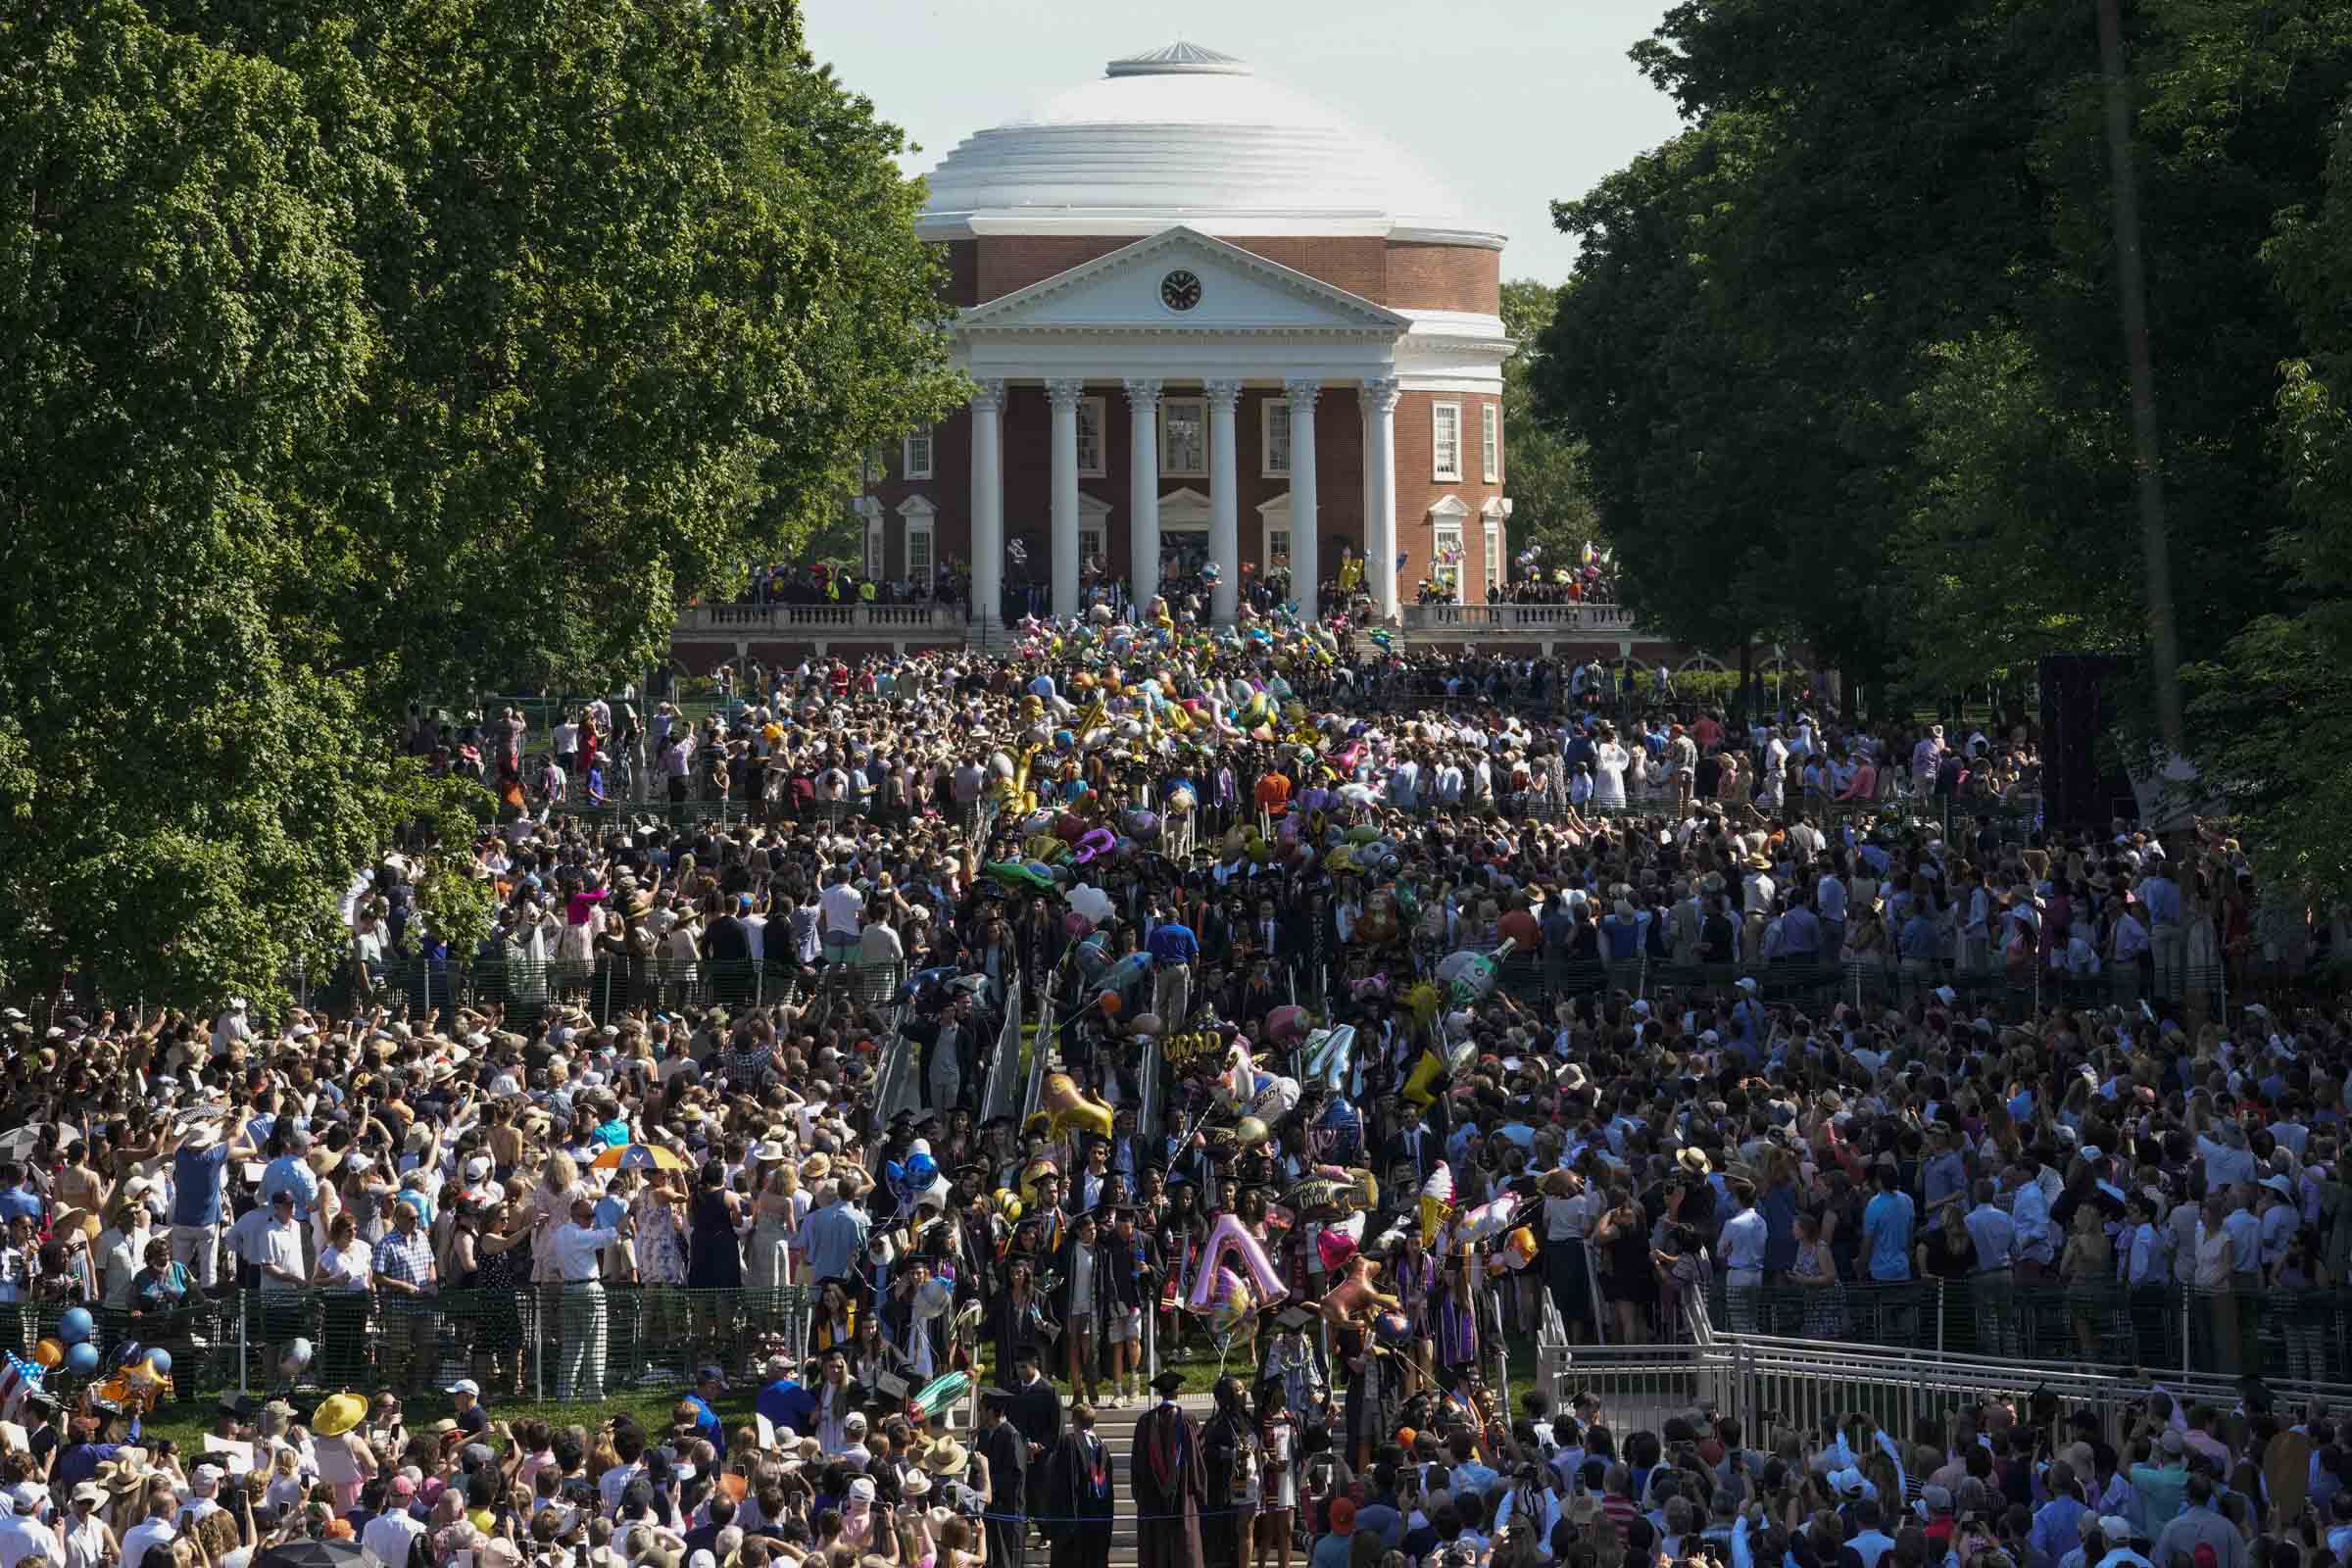 Thousands of graduates and spectators fill the Lawn in front of the Rotunda.